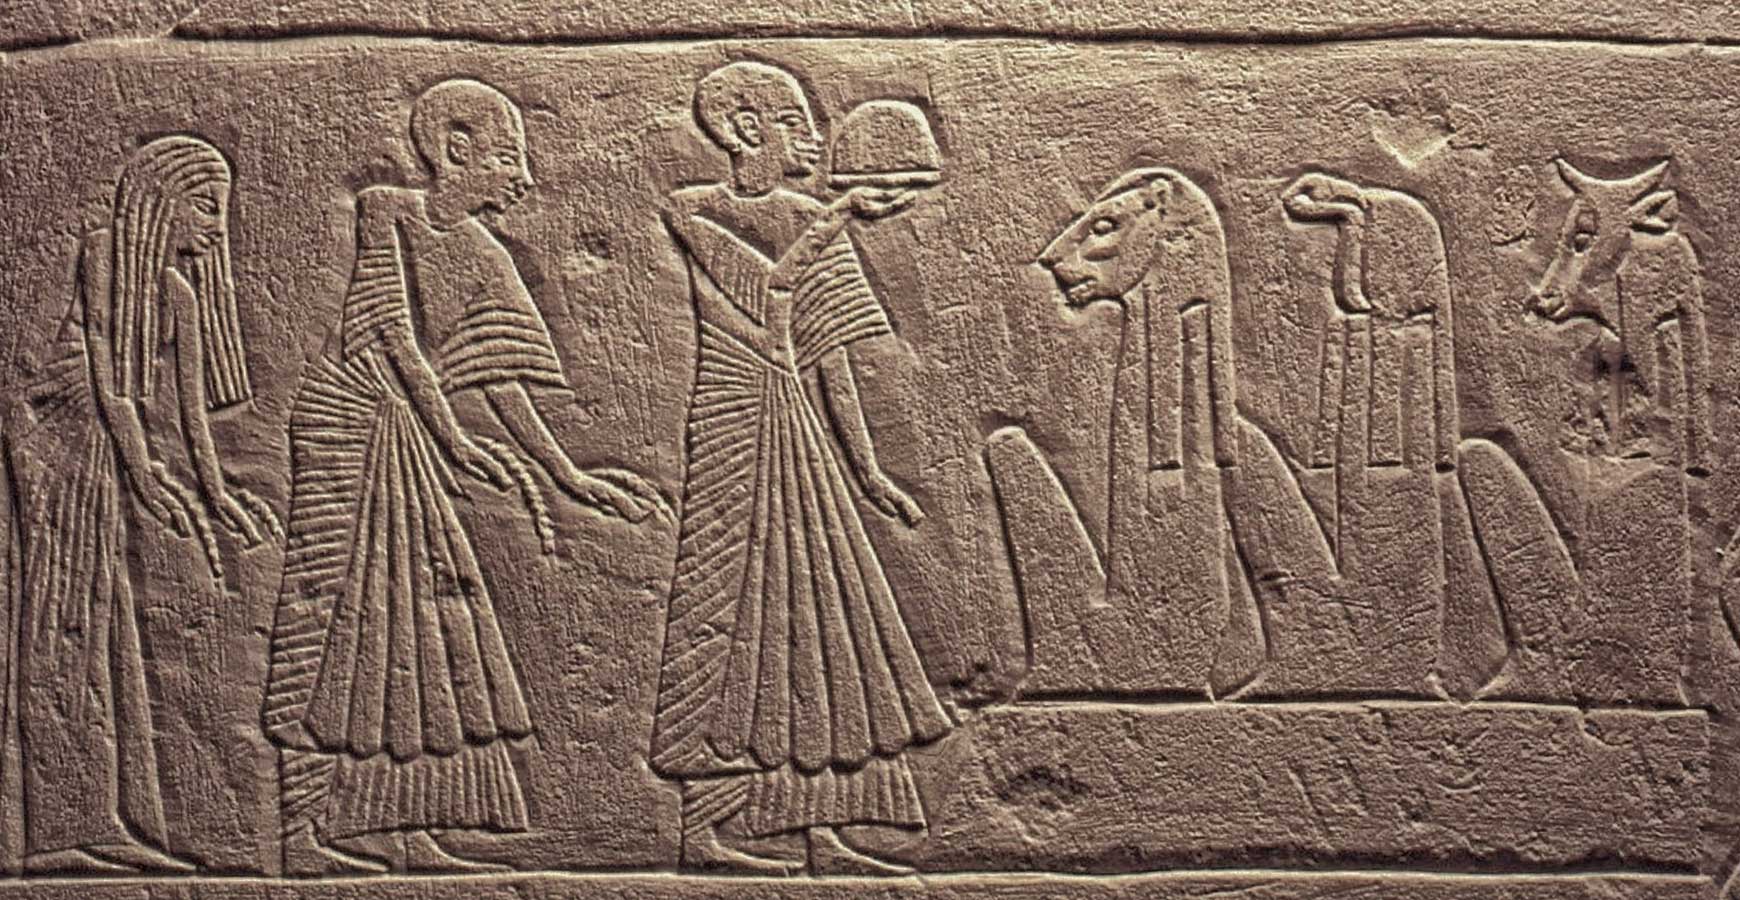 Hair and Movement in the Post-Amarna Period.